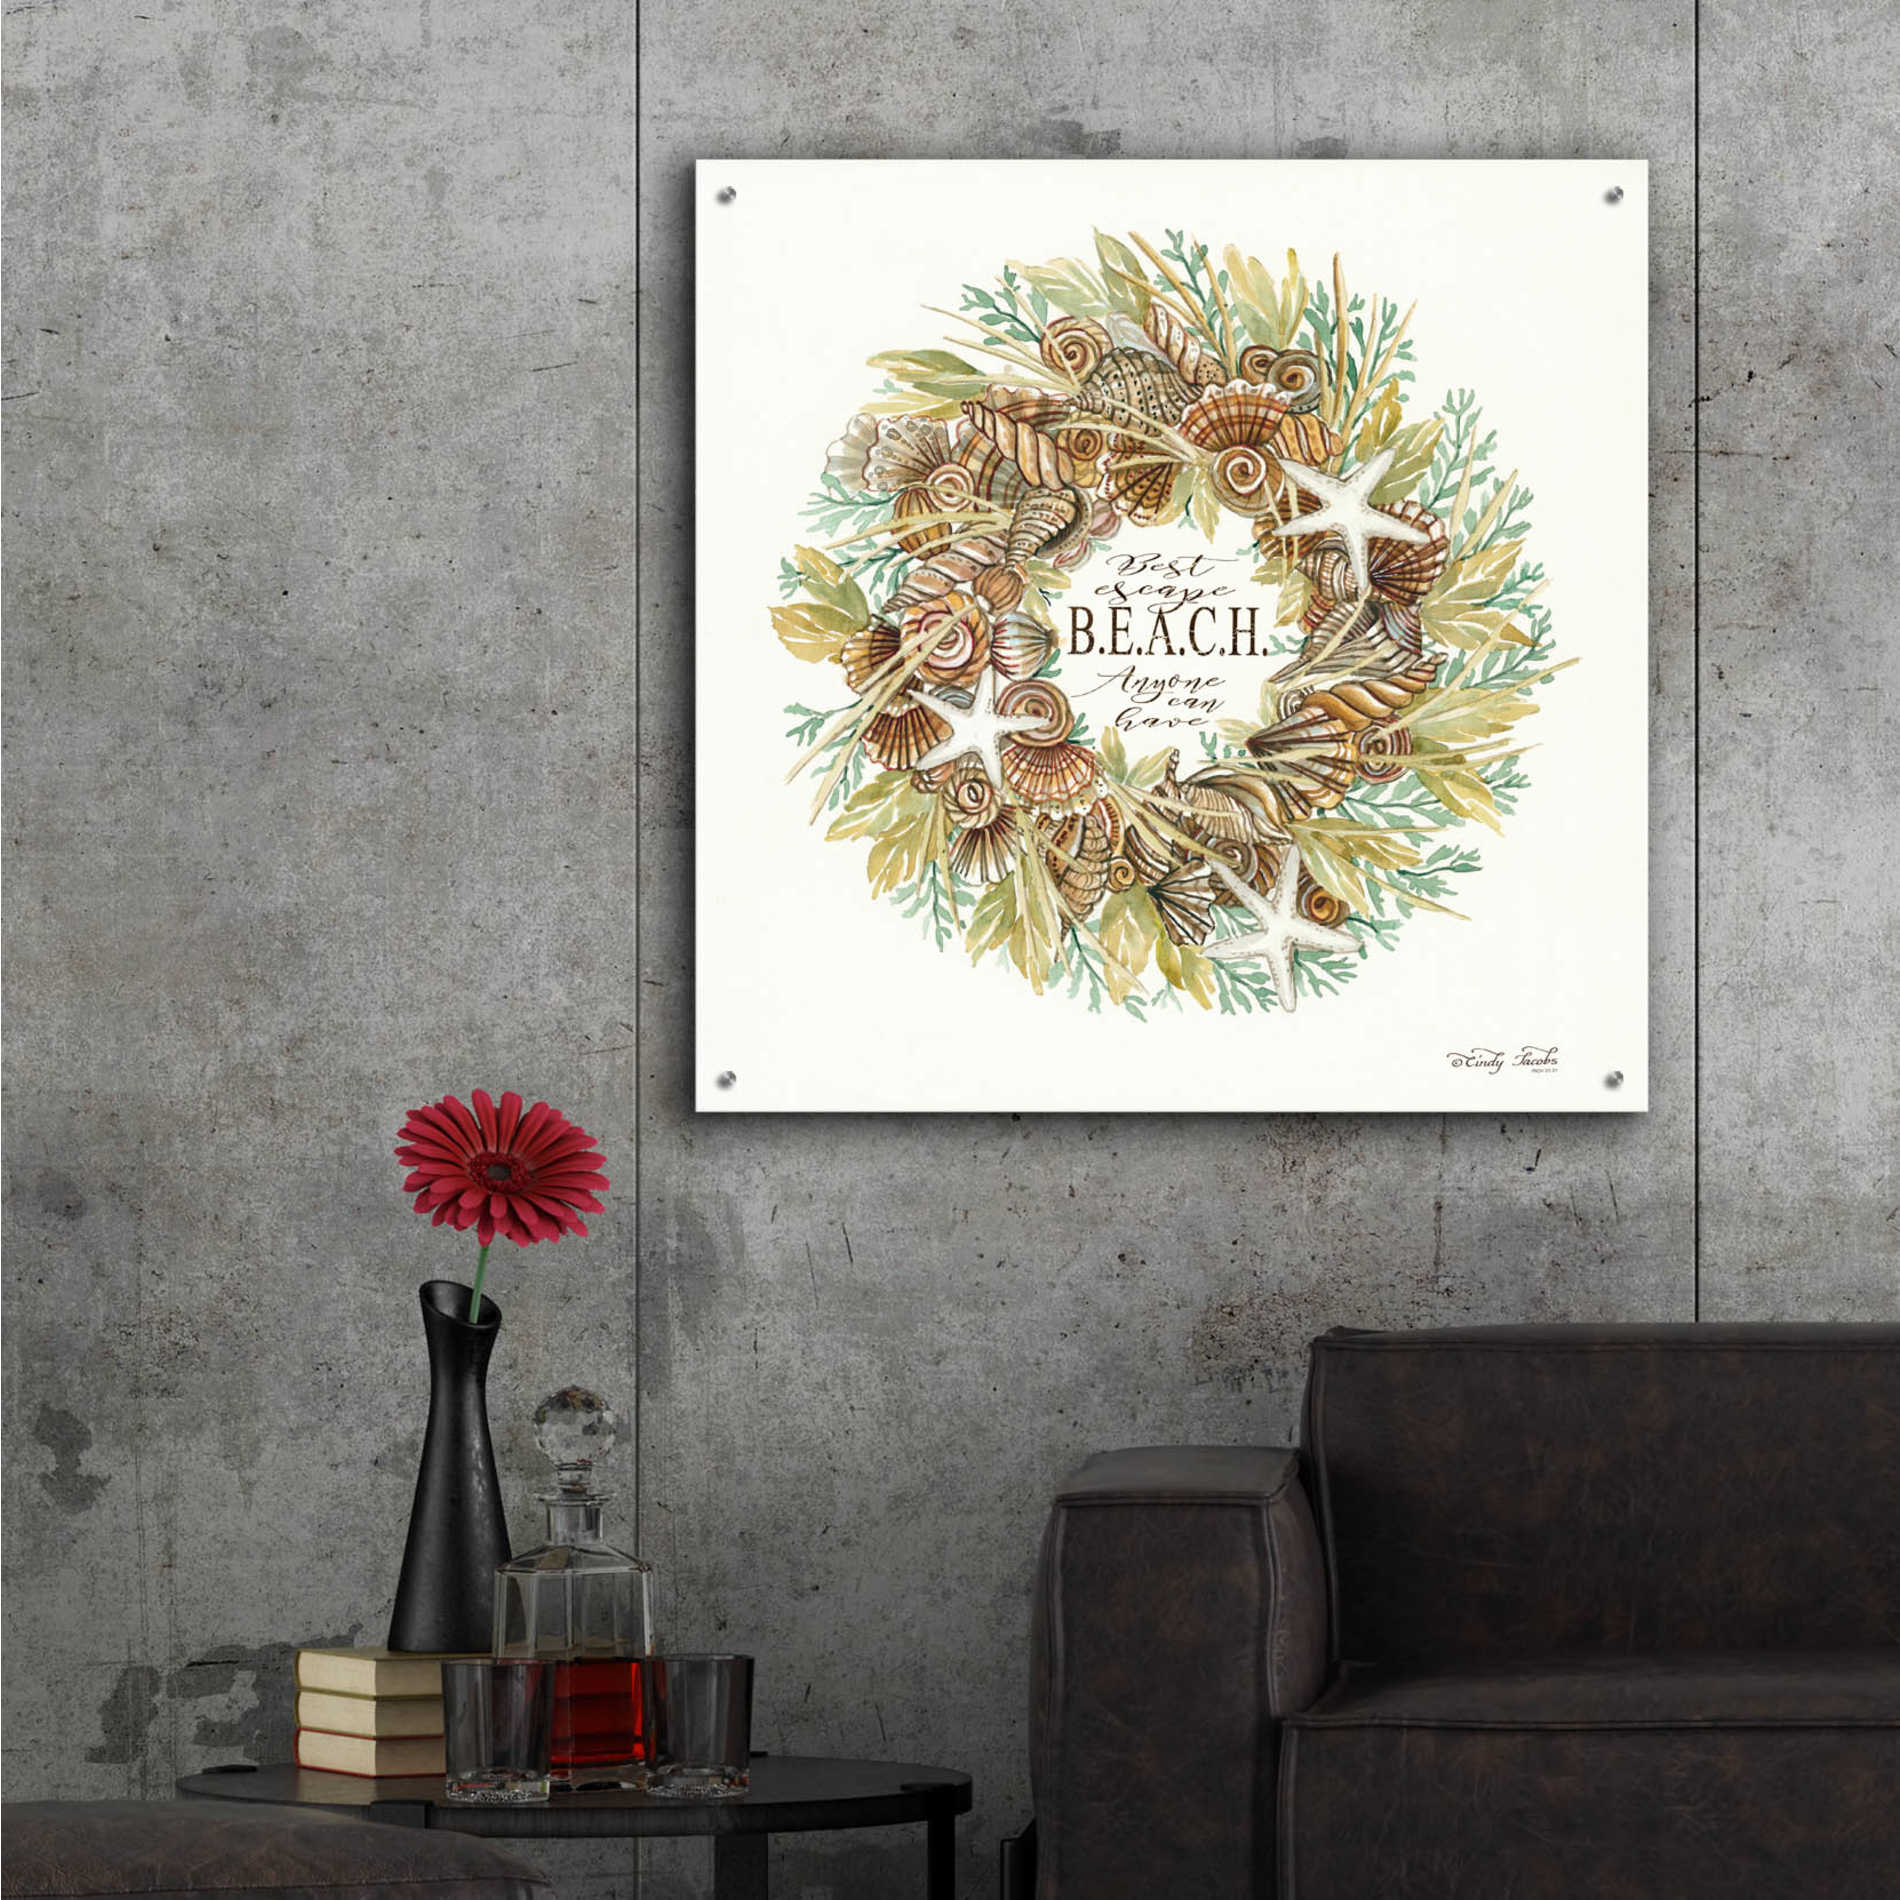 Epic Art 'Best Escape Shell Wreath' by Cindy Jacobs, Acrylic Glass Wall Art,36x36